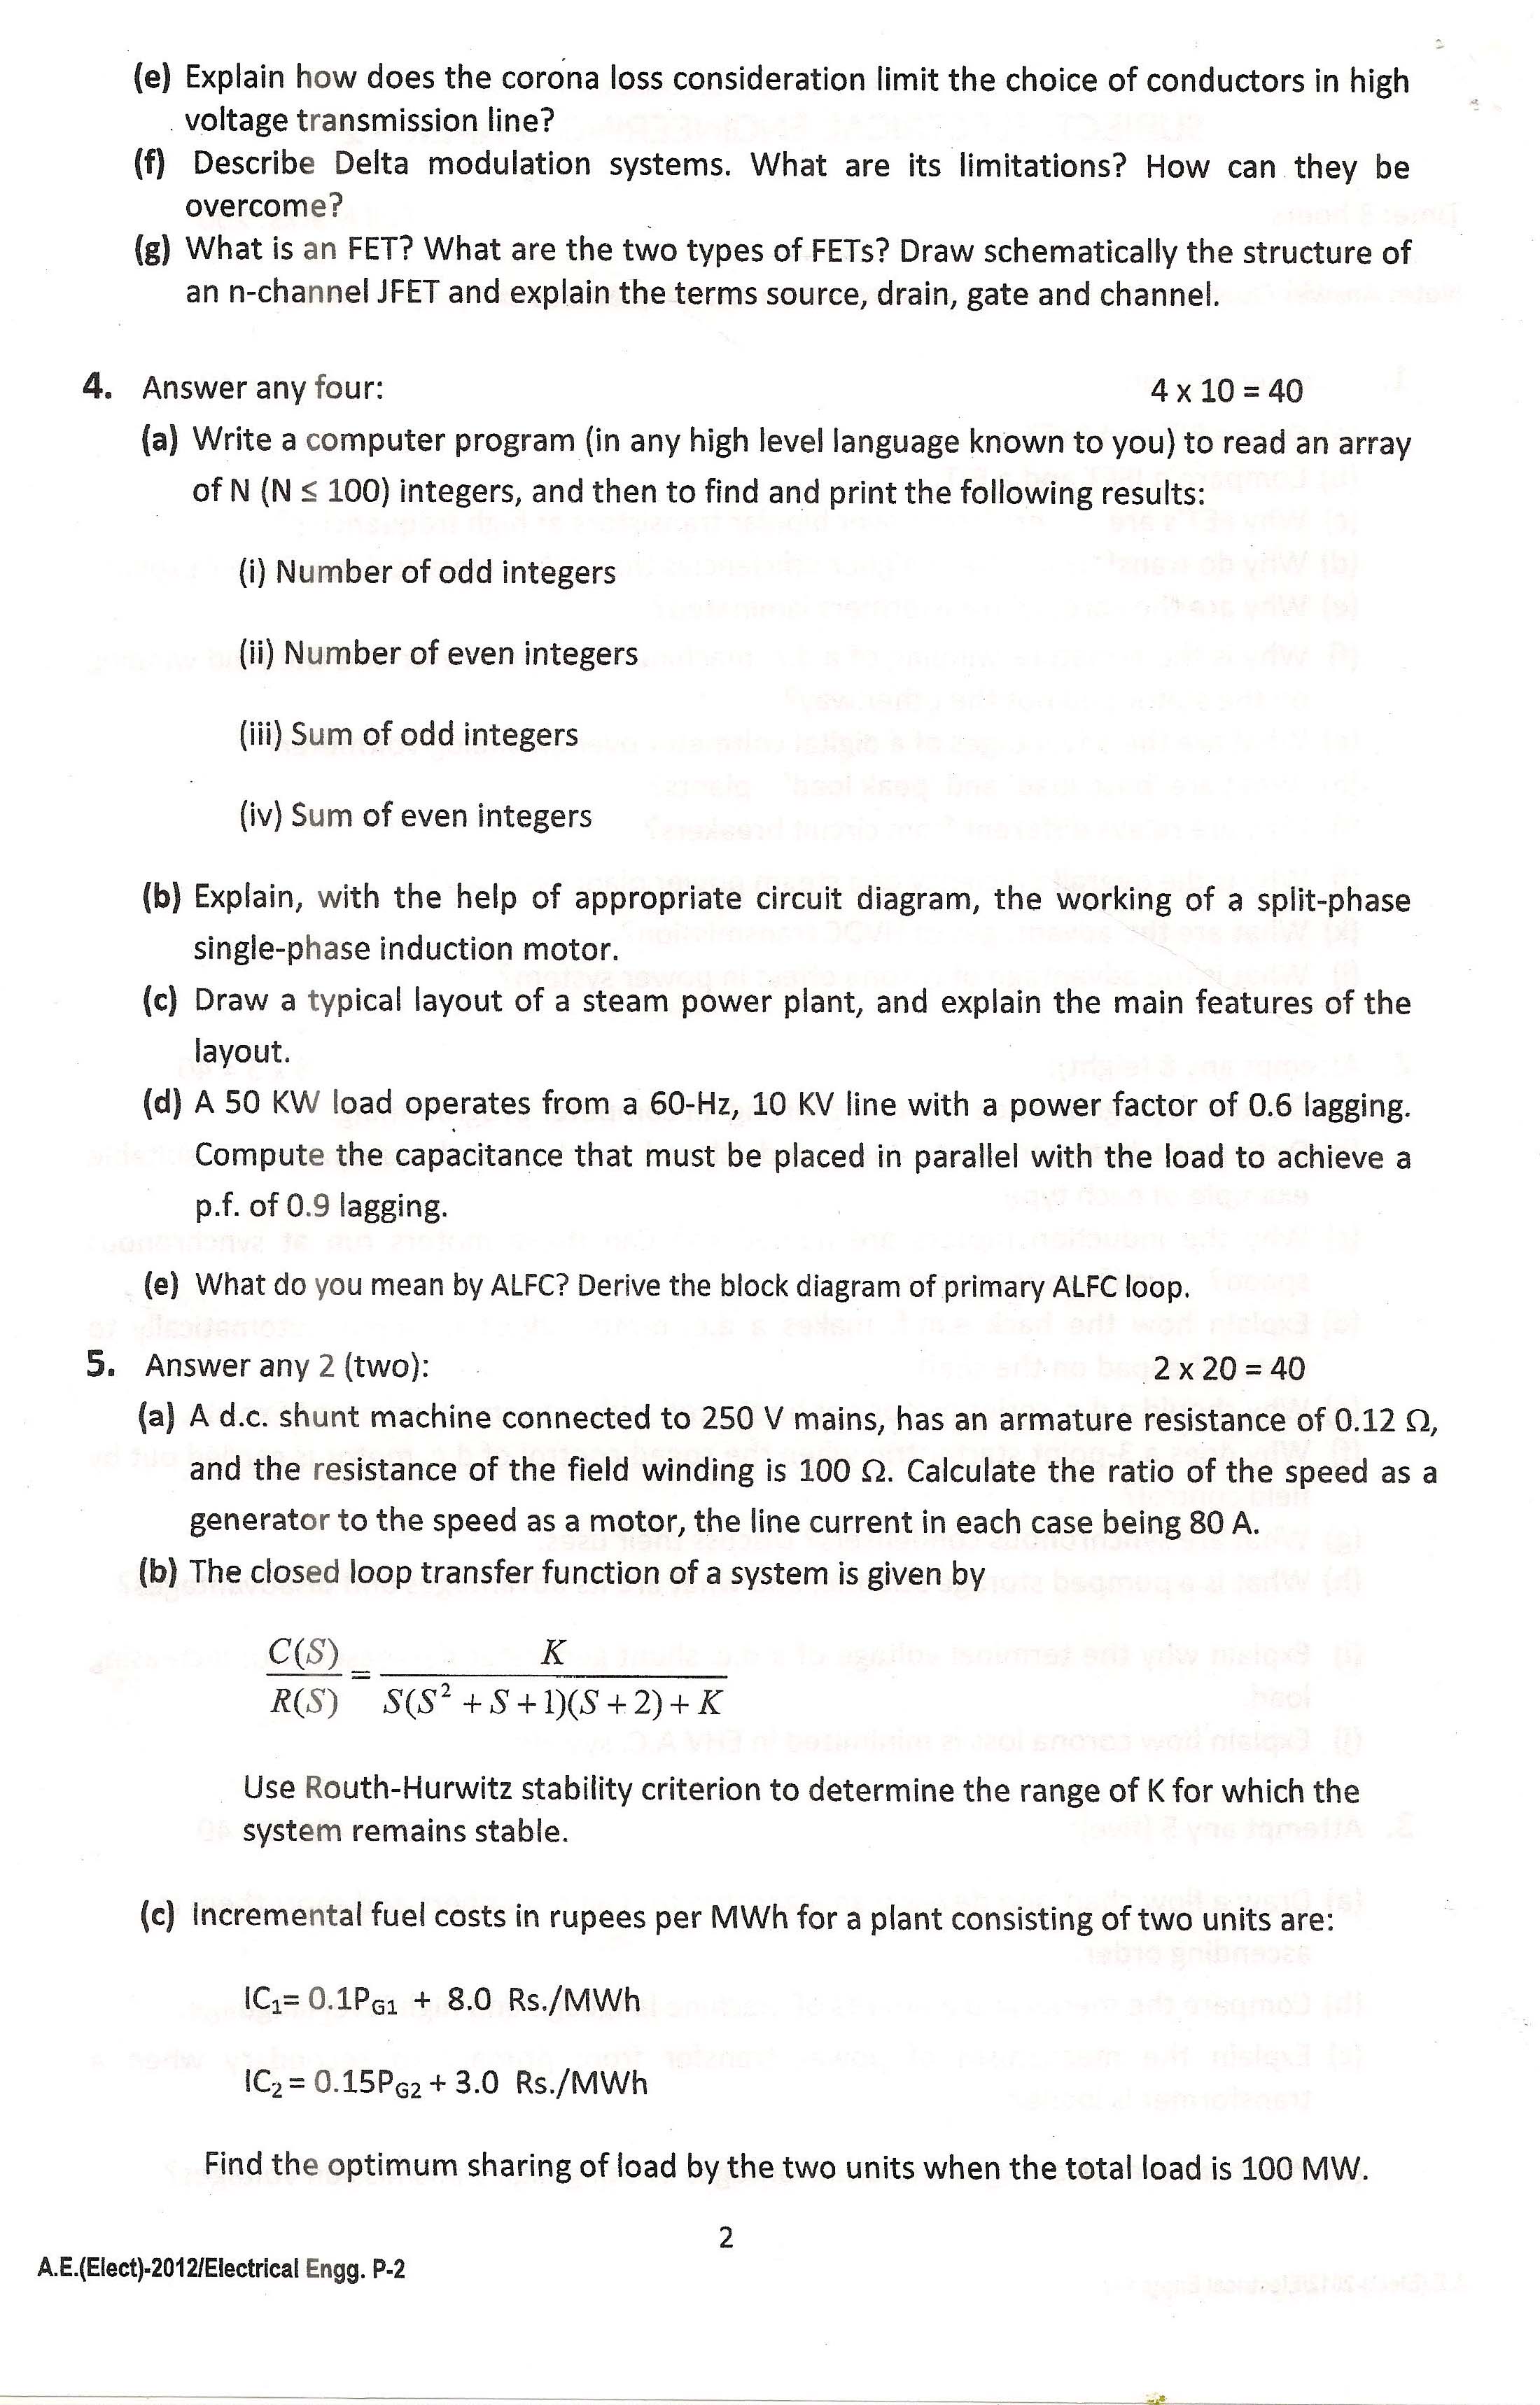 APPSC AE Electrical Exam 2012 Electrical Engineering Paper II 2